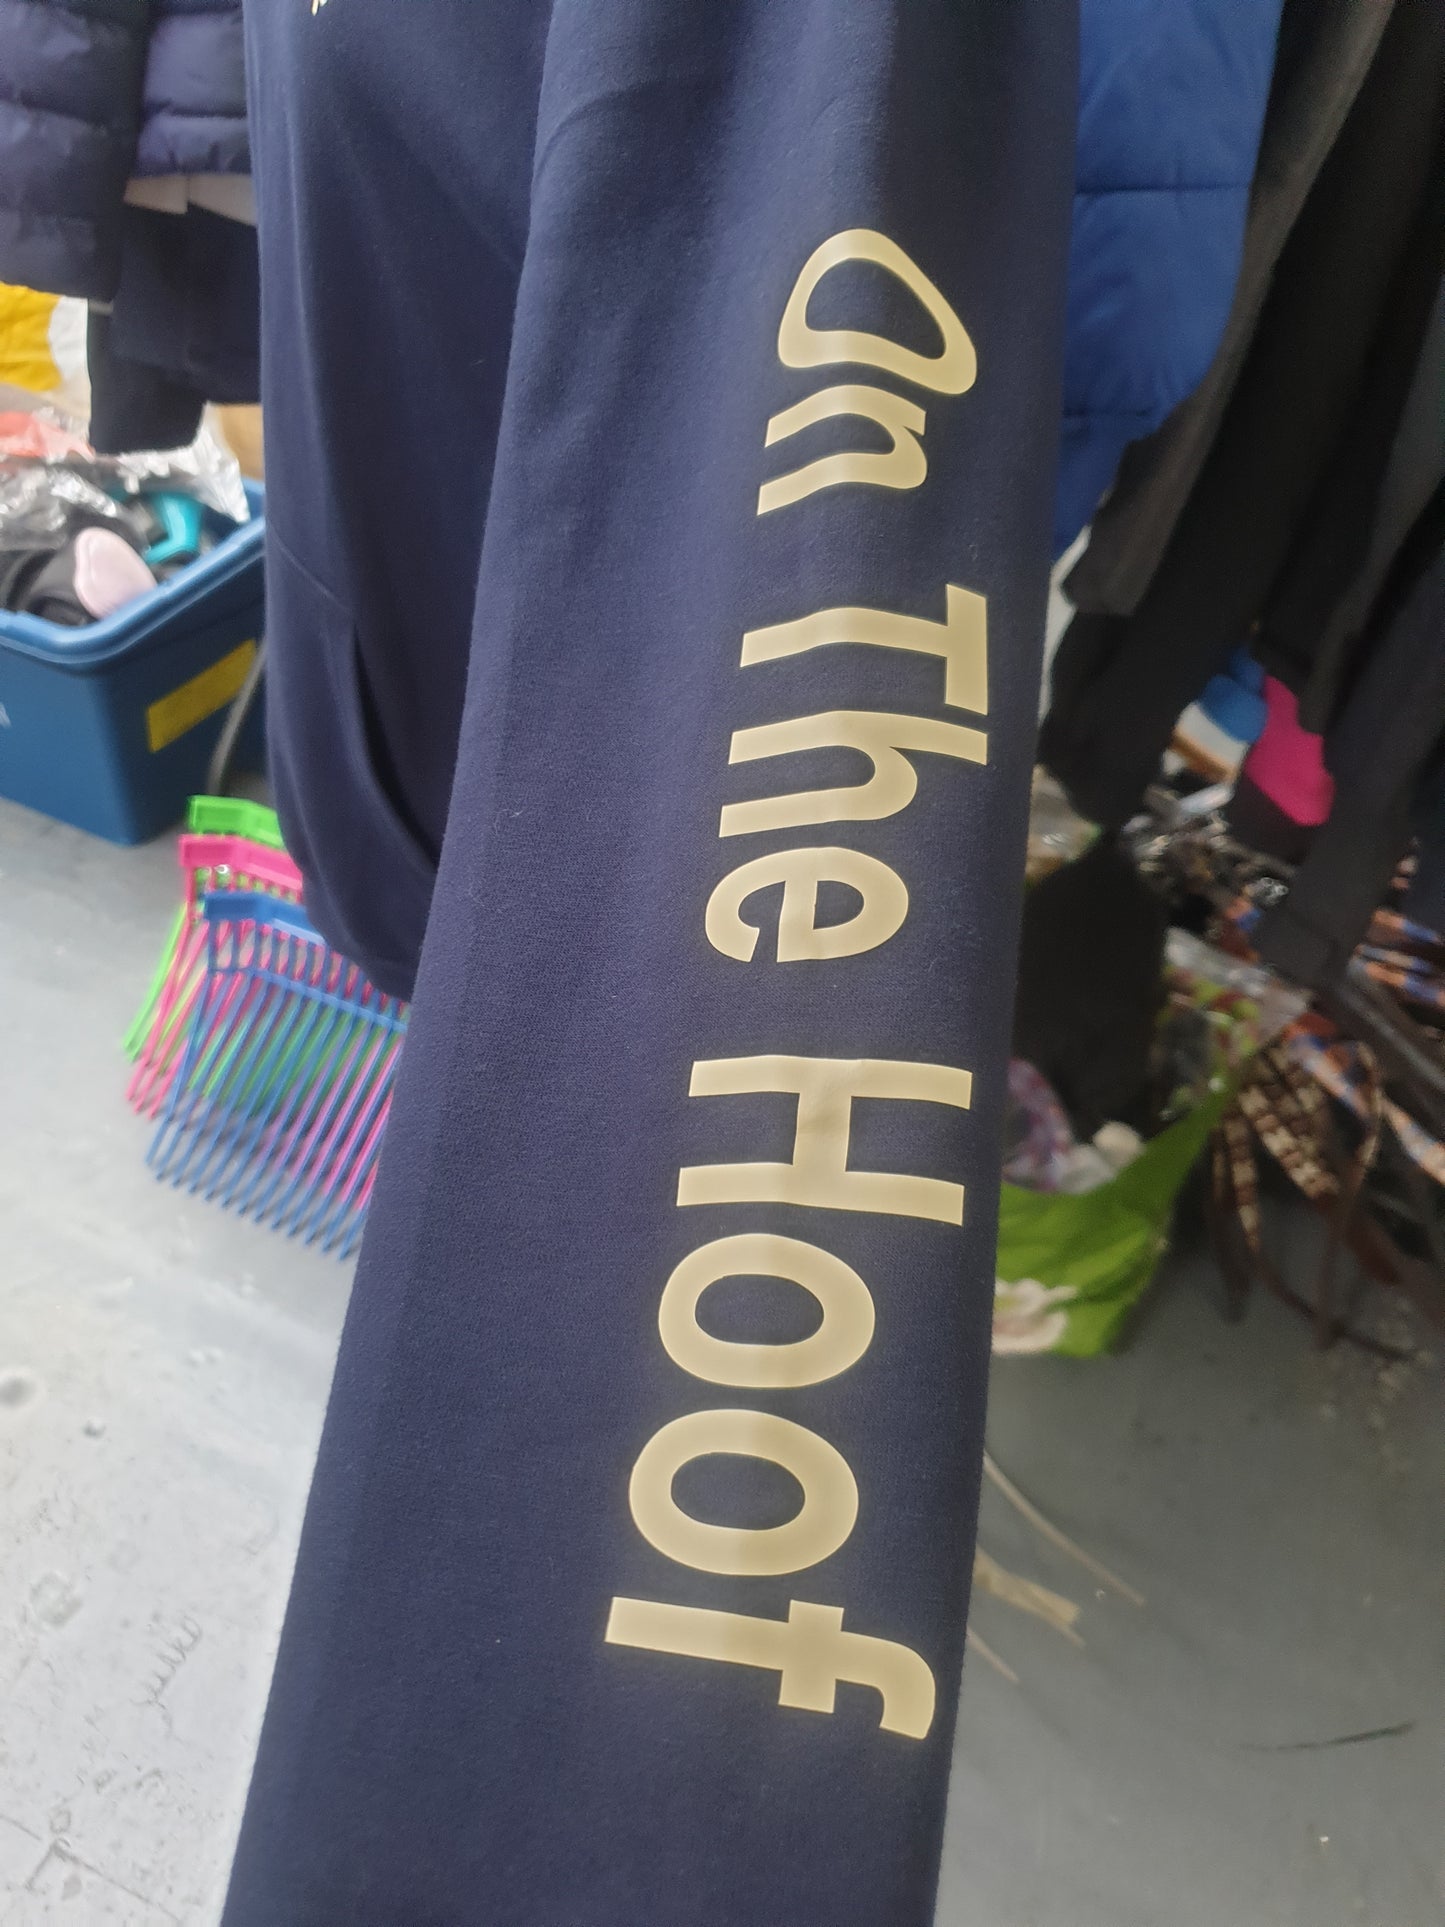 NEW on the hoof hoodie various colours and coloured writing available, all sizes xs-xxl FREE POSTAGE